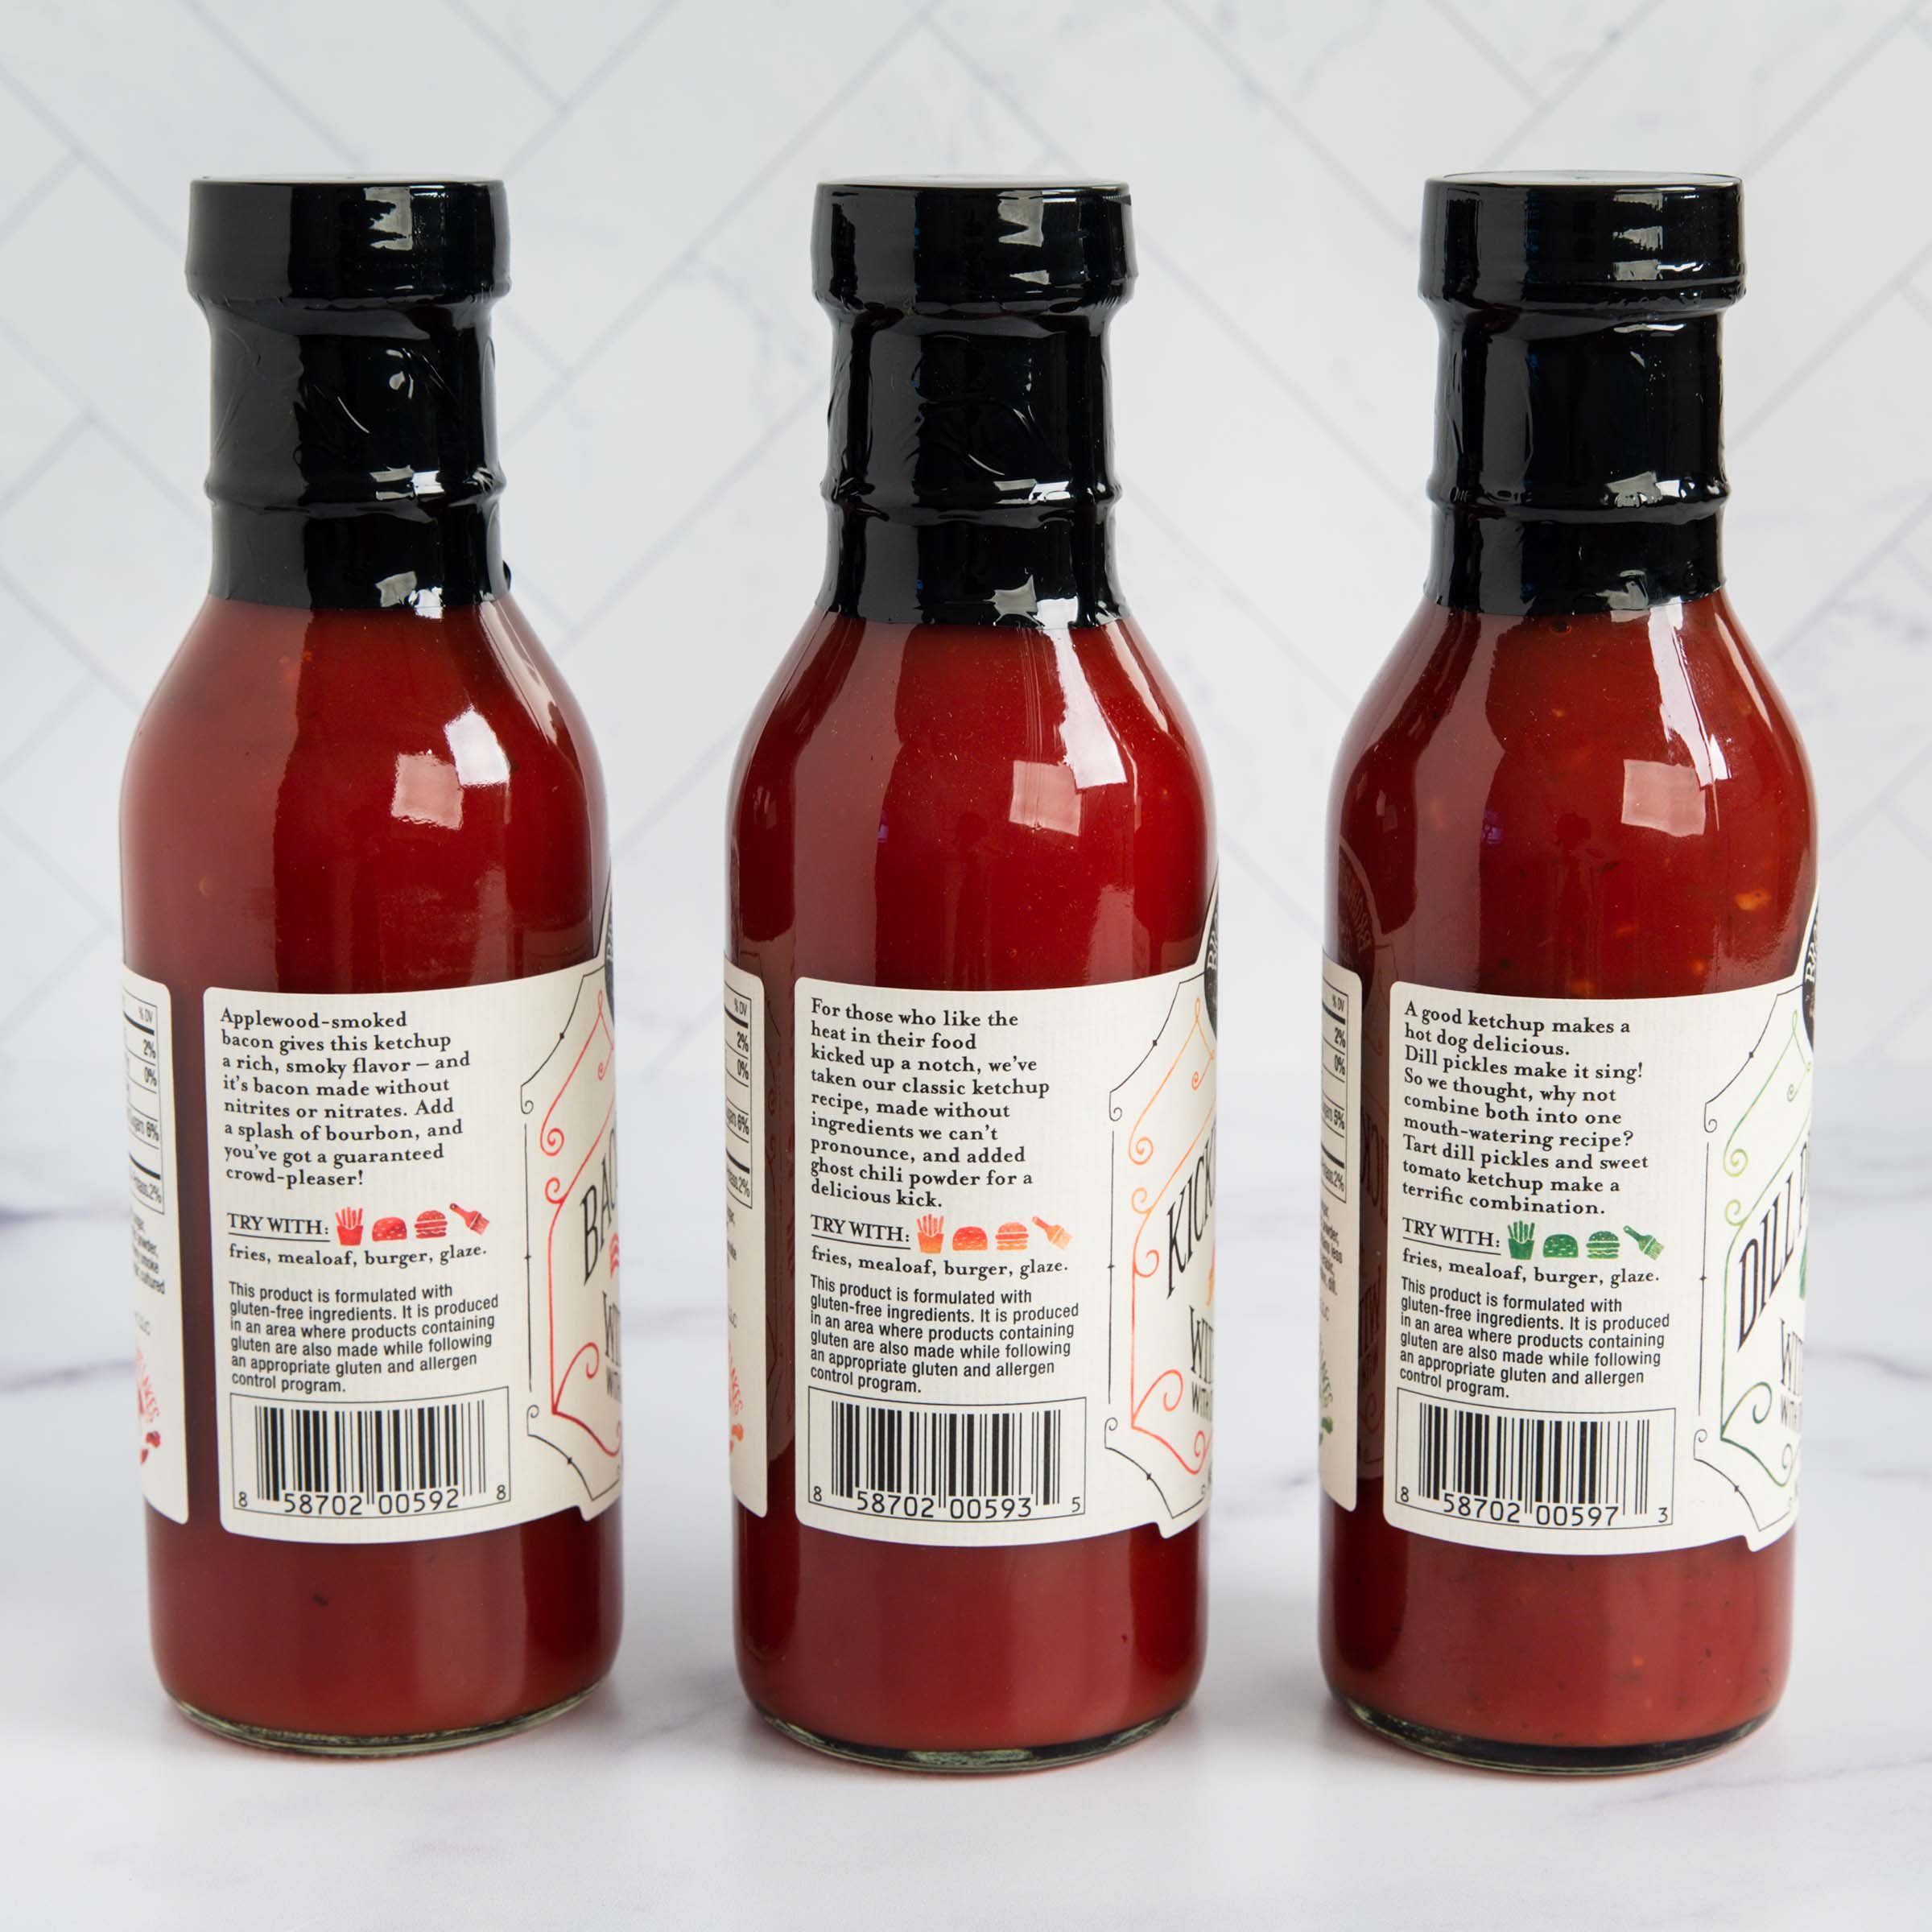 All Natural Bourbon-Infused Ketchup_Brownwood Farms_Sauces & Condiments